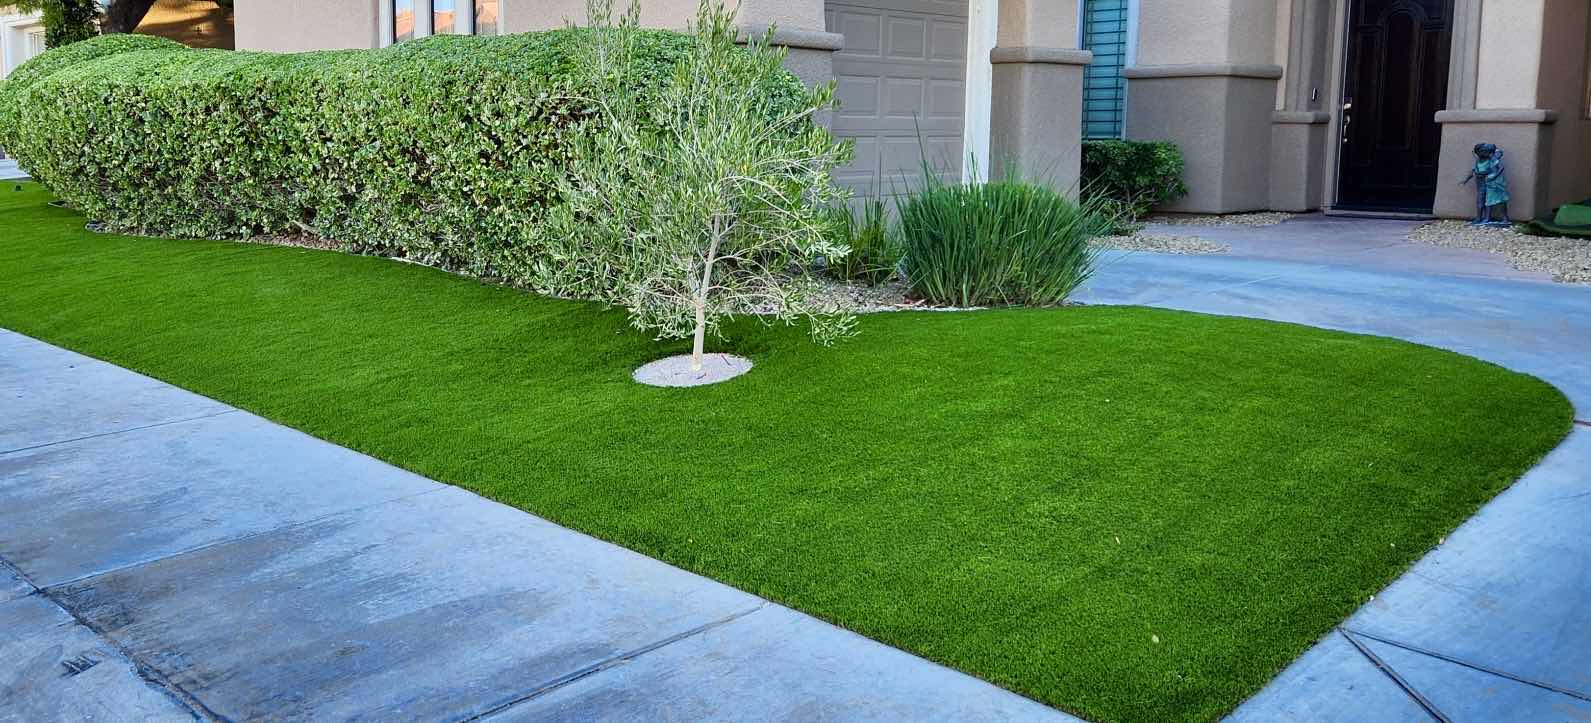 Photo 1 of SUPREME PREMIUM QUALITY ARTIFICIAL TURF GRASS 15’ X 100’ (1500 TOTAL SQ FT) ANTHEM COUNTRY CLUB APPROVED TOTAL TURF HEIGHT 1.97” (Sun  June 2nd & Mon June 3rd)